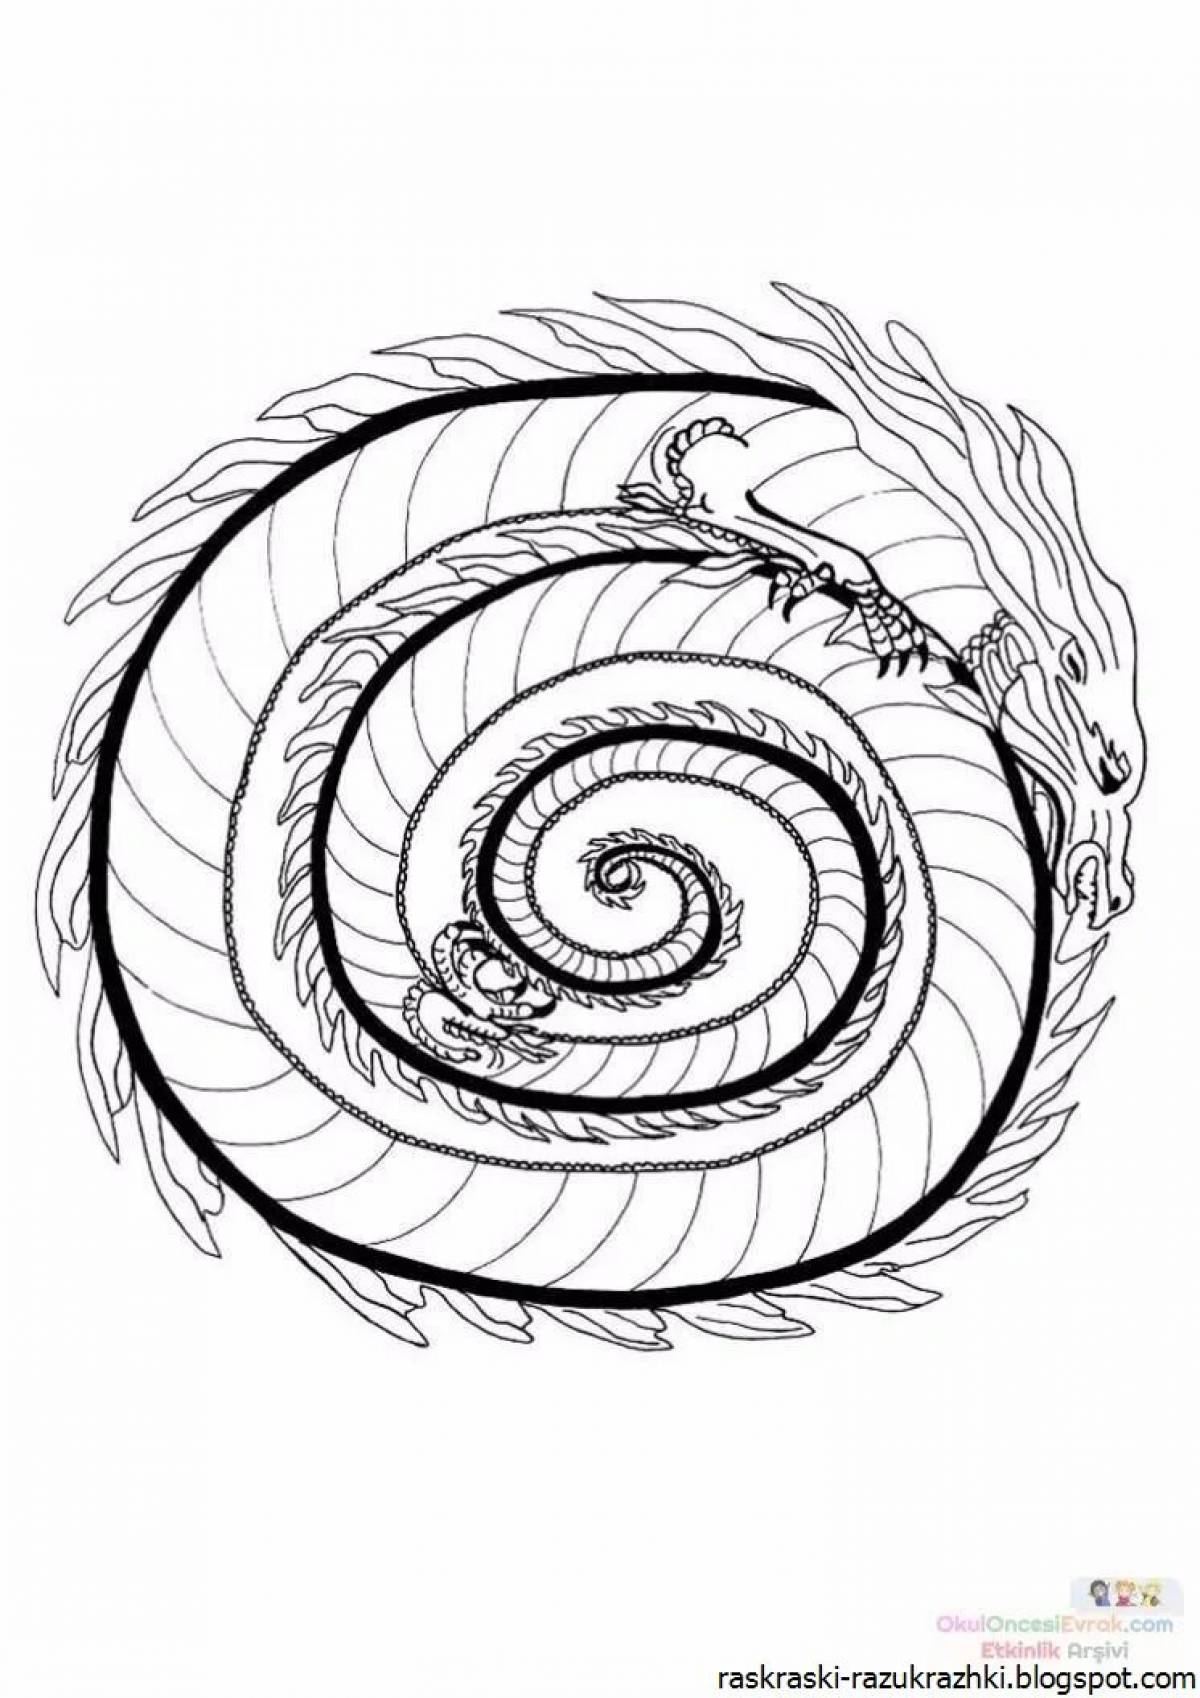 Great program for coloring the spiral